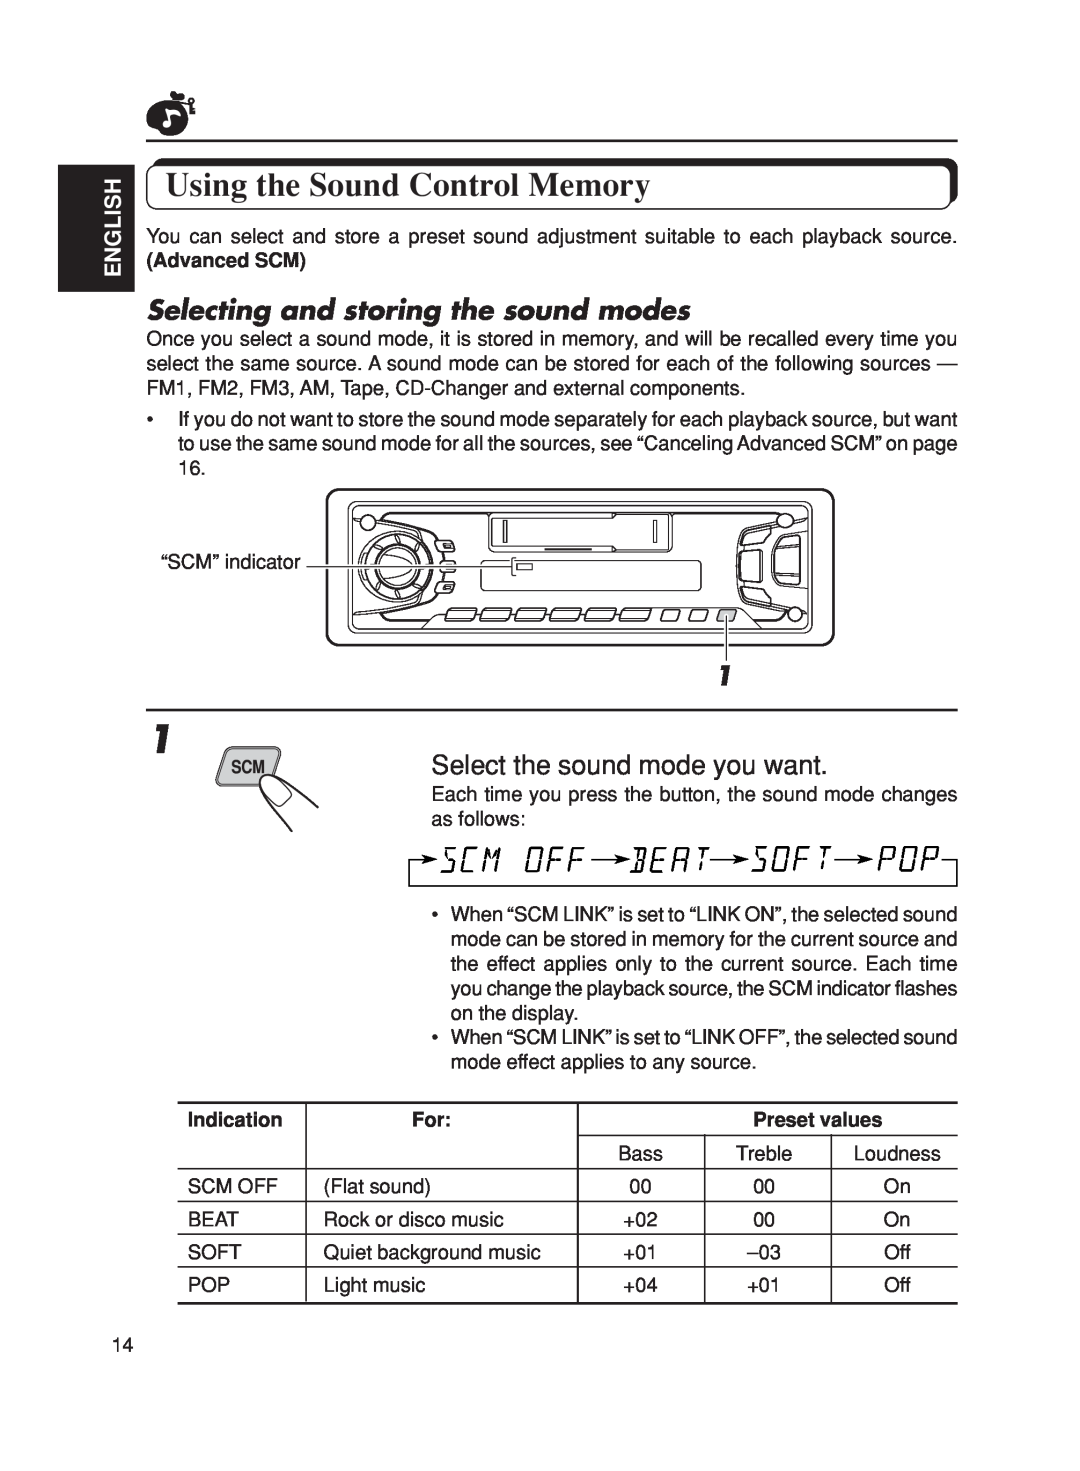 JVC KS-FX270 manual Using the Sound Control Memory, Selecting and storing the sound modes, Select the sound mode you want 